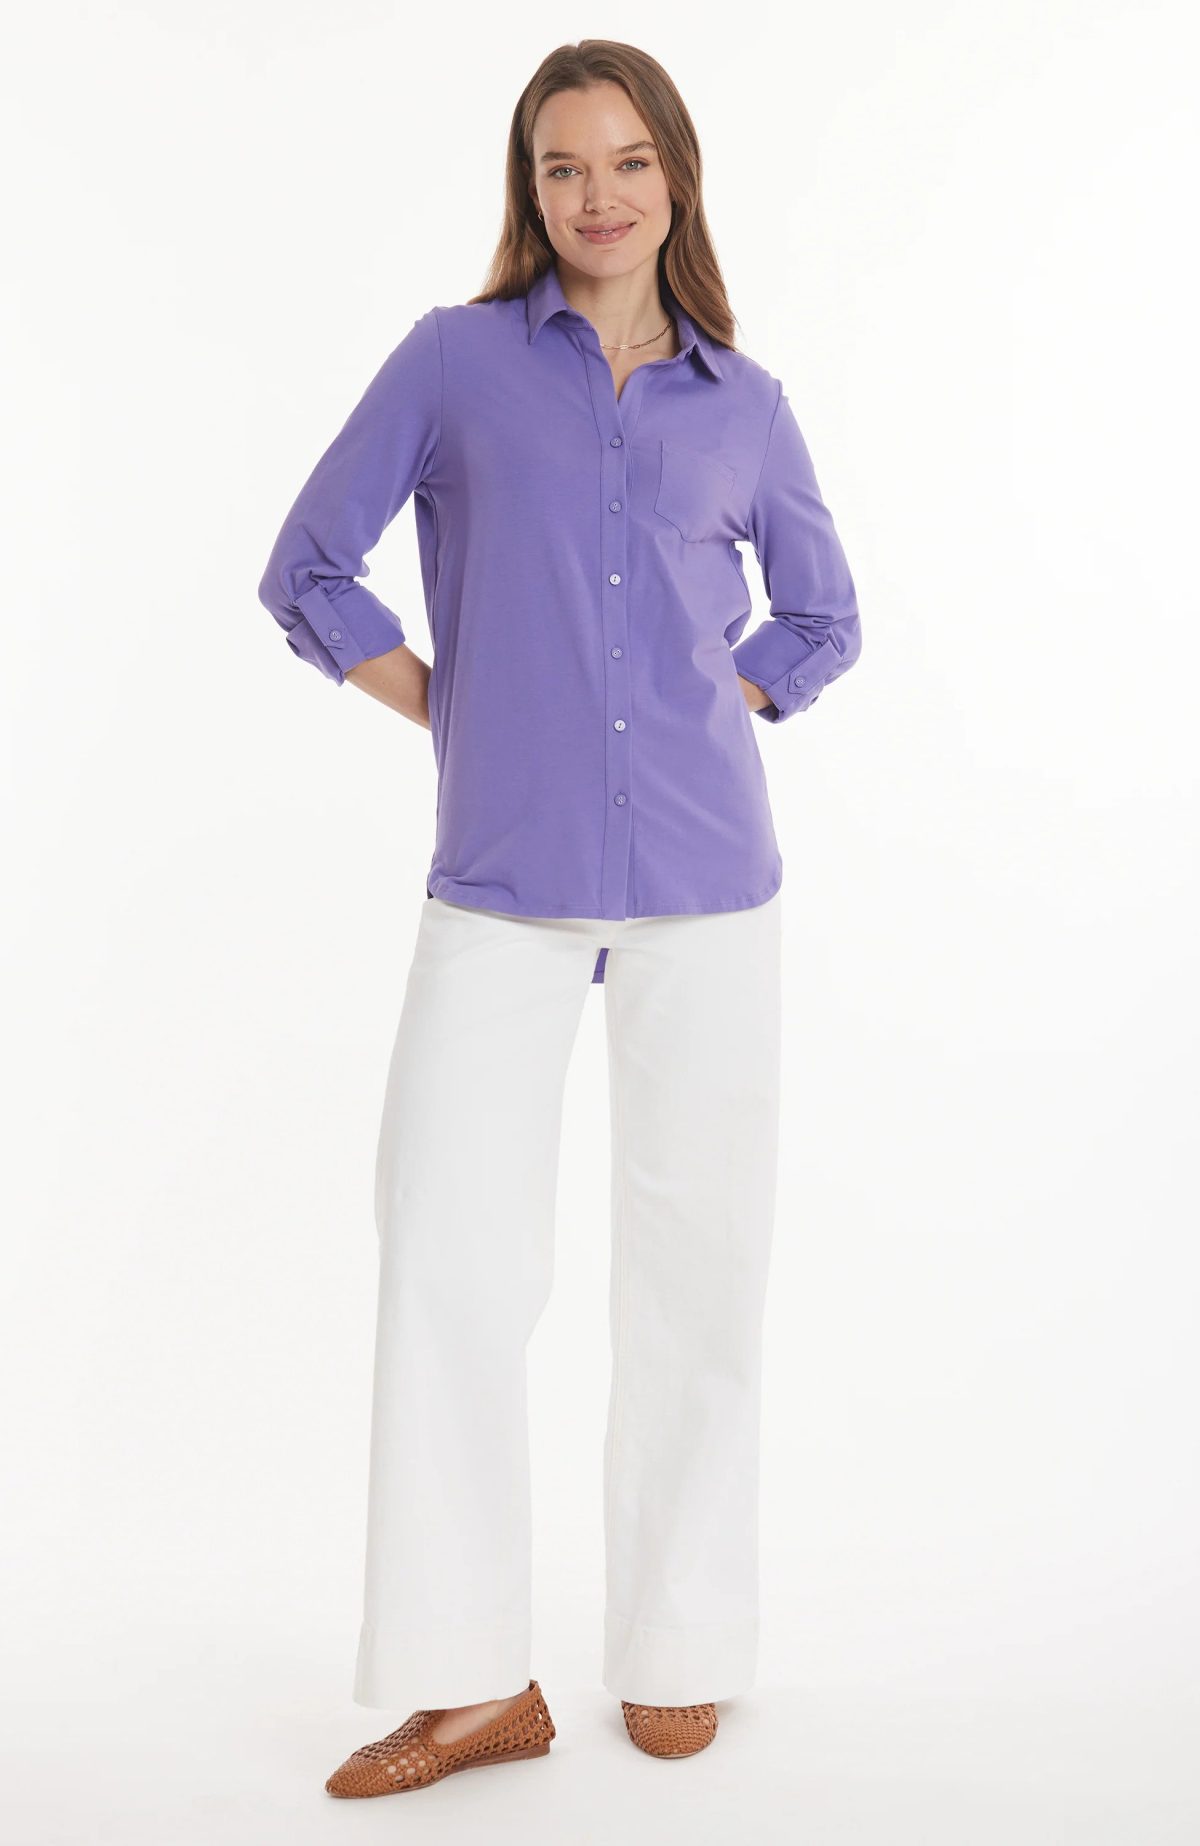 Tyler Boe 12012 Crocus Button Down Front Patti Roll Sleeve Polo | Ooh Ooh Shoes women's clothing and shoe boutique located in Naples and Mashpee